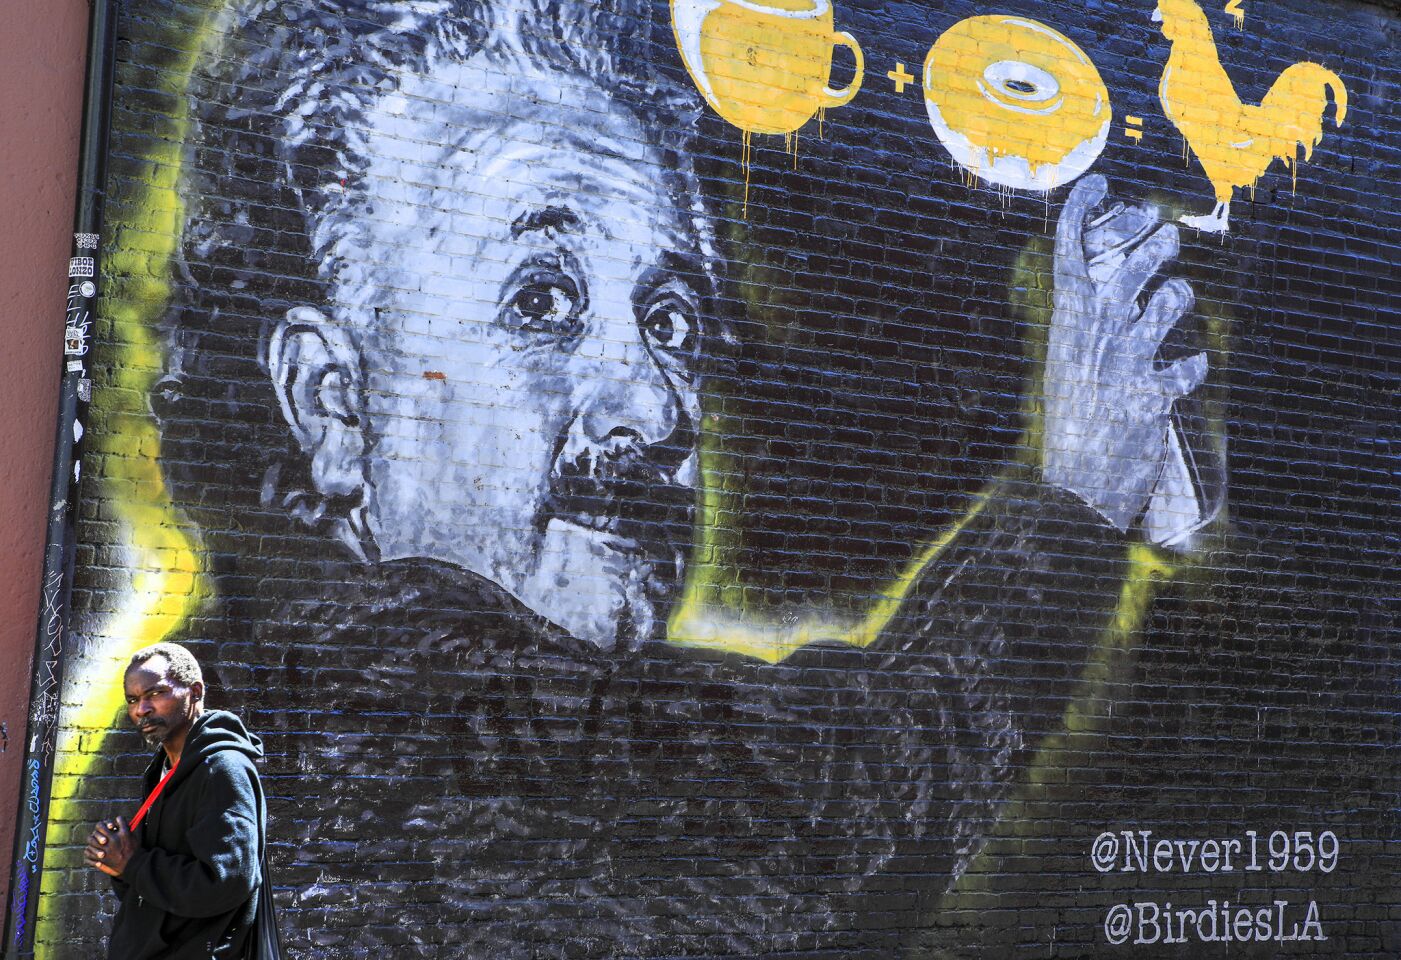 All that shopping probably worked up an appetite, right? Follow the mural of genius Albert Einstein to Birdies on West Olympic Blvd.